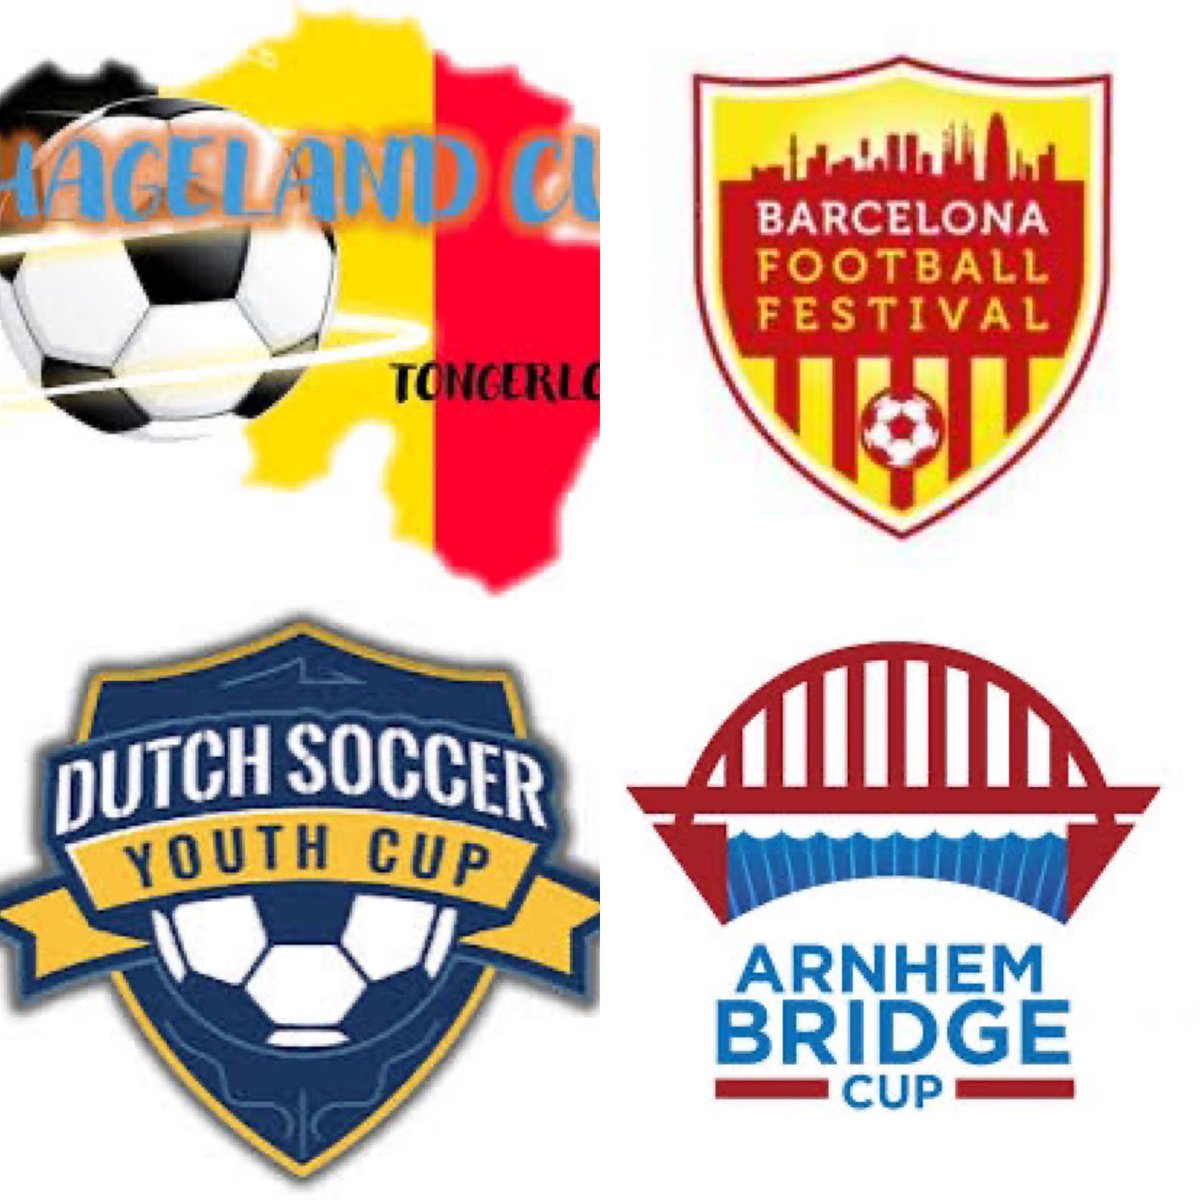 It's match day Good luck to all our teams today taking part in tournaments across Europe we hope you enjoy the experience of an international tournament ⚽️⚽️ #isl #footballtour #dutchsoccercup #arnhembridgecup #barcelonafootballfestival #hagelandcup